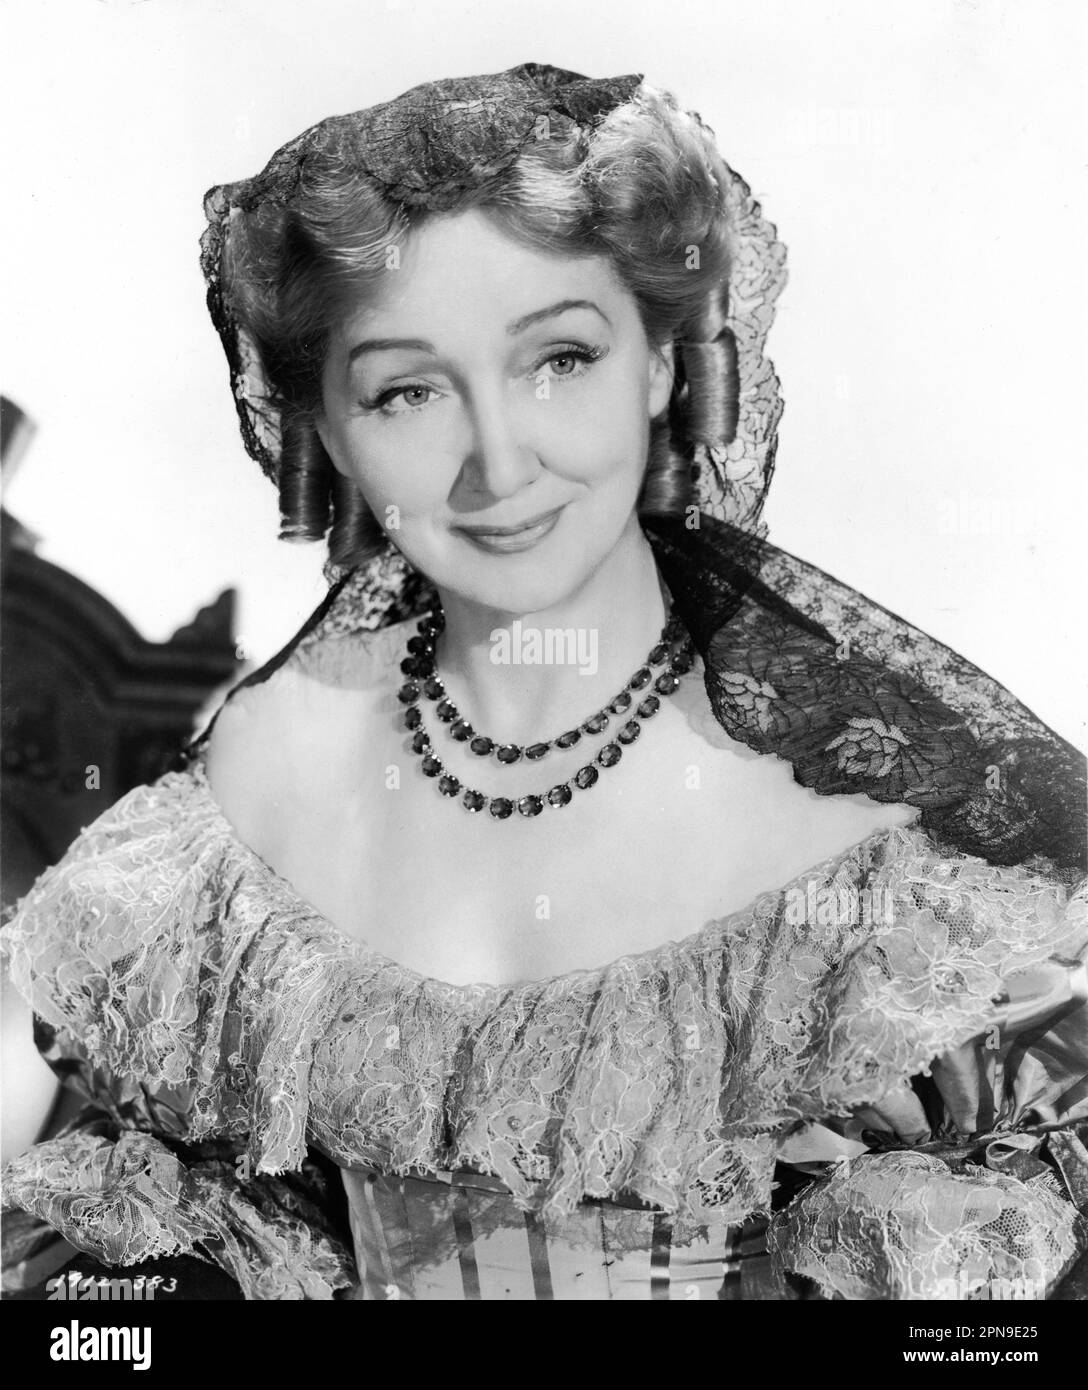 HEDDA HOPPER Portrait as Aunt Henrietta in REAP THE WILD WIND 1942 director CECIL B. DeMILLE based on Saturday Evening Post story by Thelma Strabel screenplay Alan Le May Charles Bennett and Jesse Lasky Jr. music Victor Young costume design Natalie Visart Paramount Pictures Stock Photo